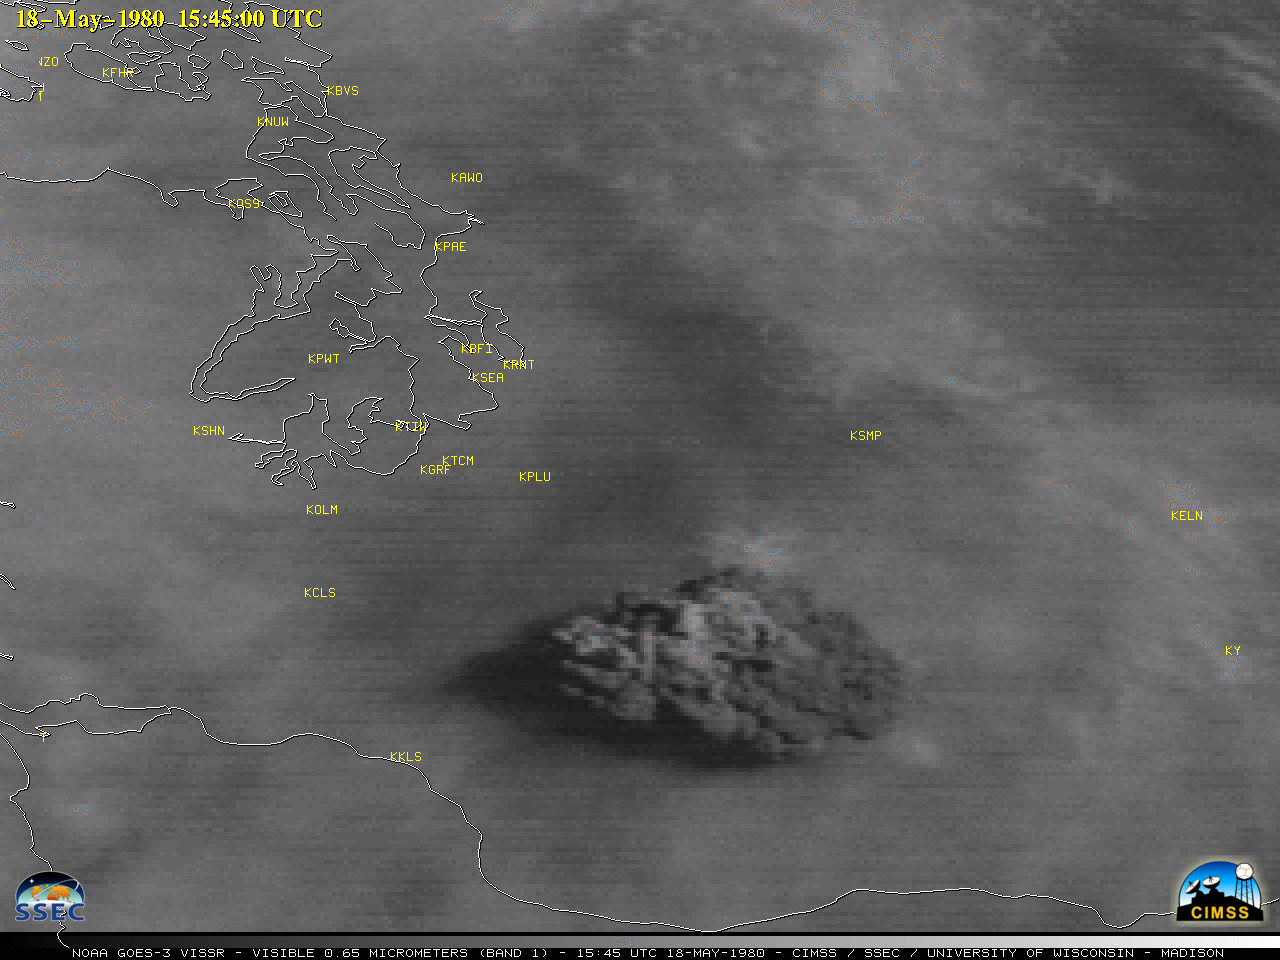 GOES-3 Visible (0.65 µm) images at 1545 and 1615 UTC [click to enlarge]